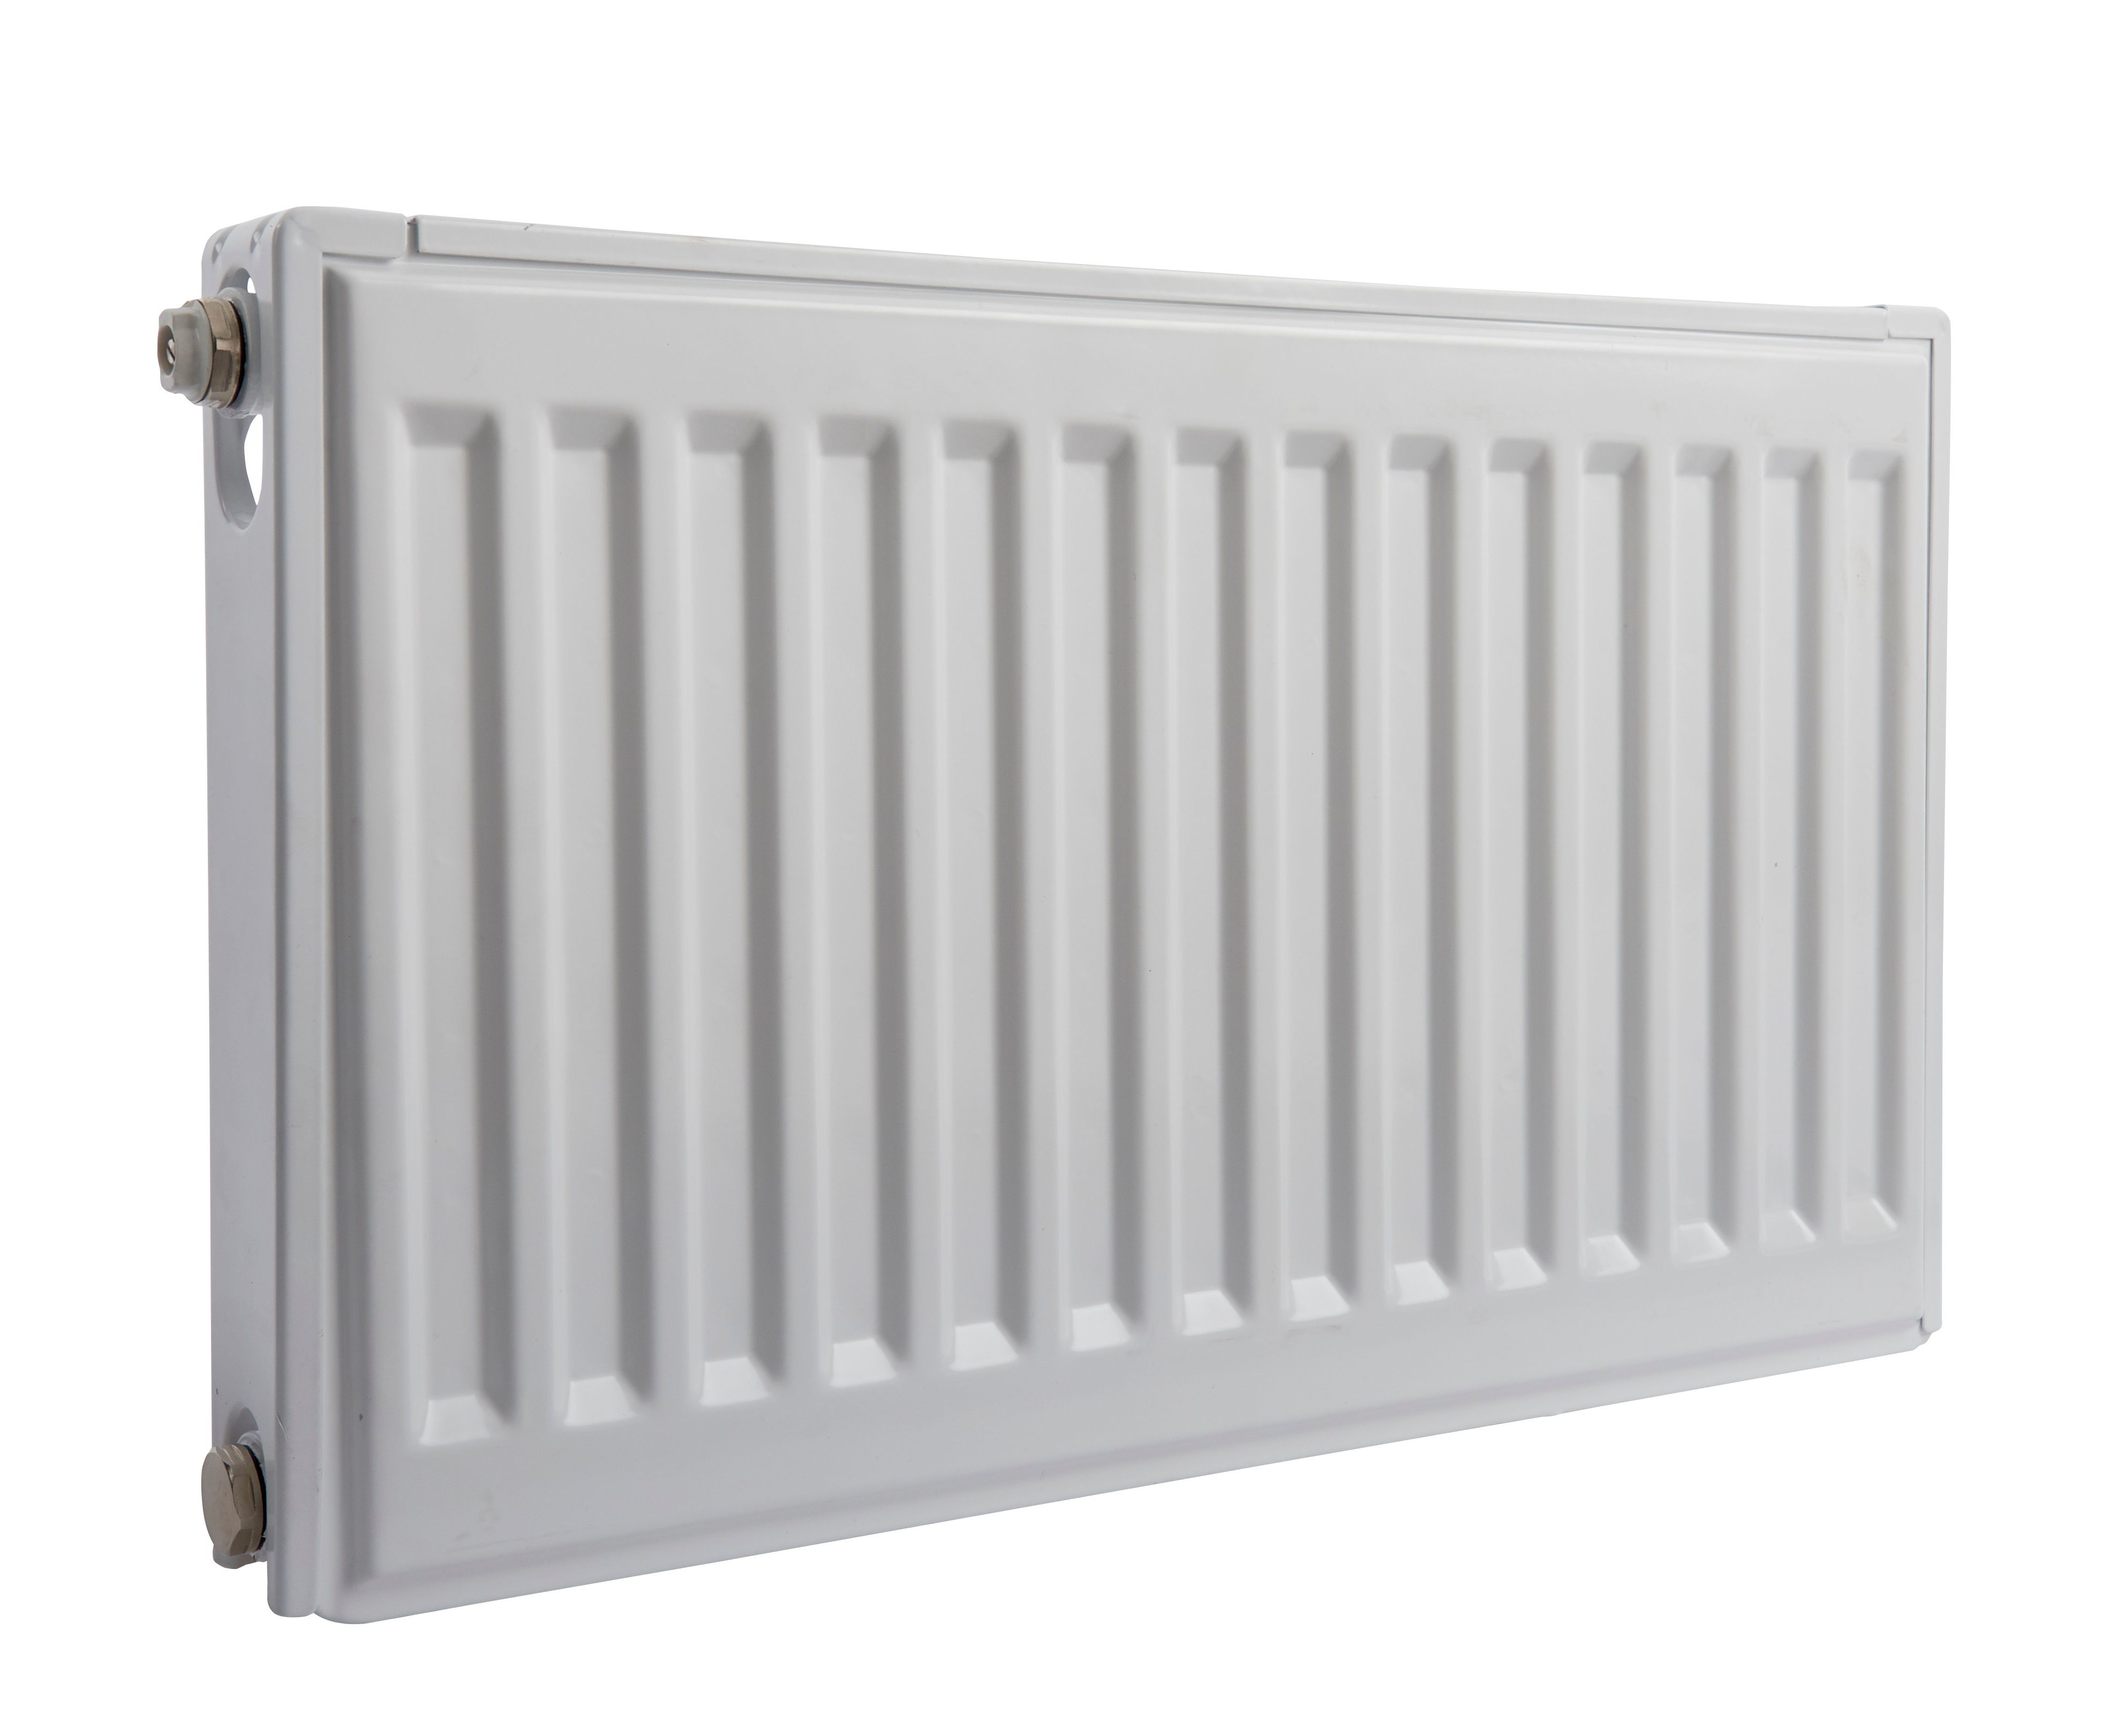 Image of Homeline by Stelrad 300 x 400mm Type 11 Single Panel Single Convector Radiator